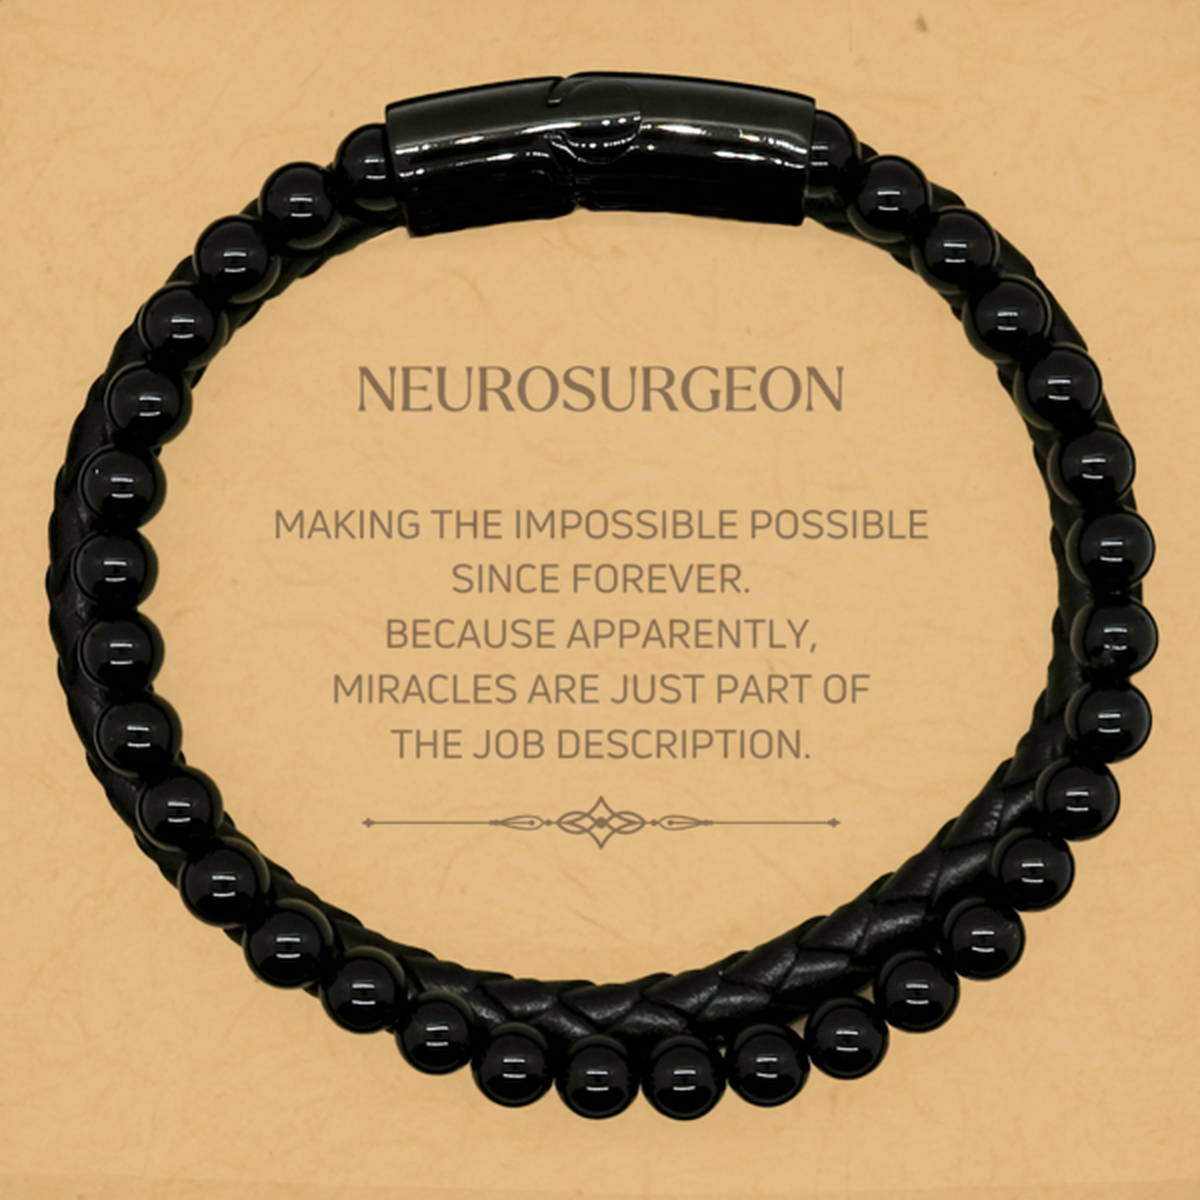 Funny Neurosurgeon Gifts, Miracles are just part of the job description, Inspirational Birthday Stone Leather Bracelets For Neurosurgeon, Men, Women, Coworkers, Friends, Boss